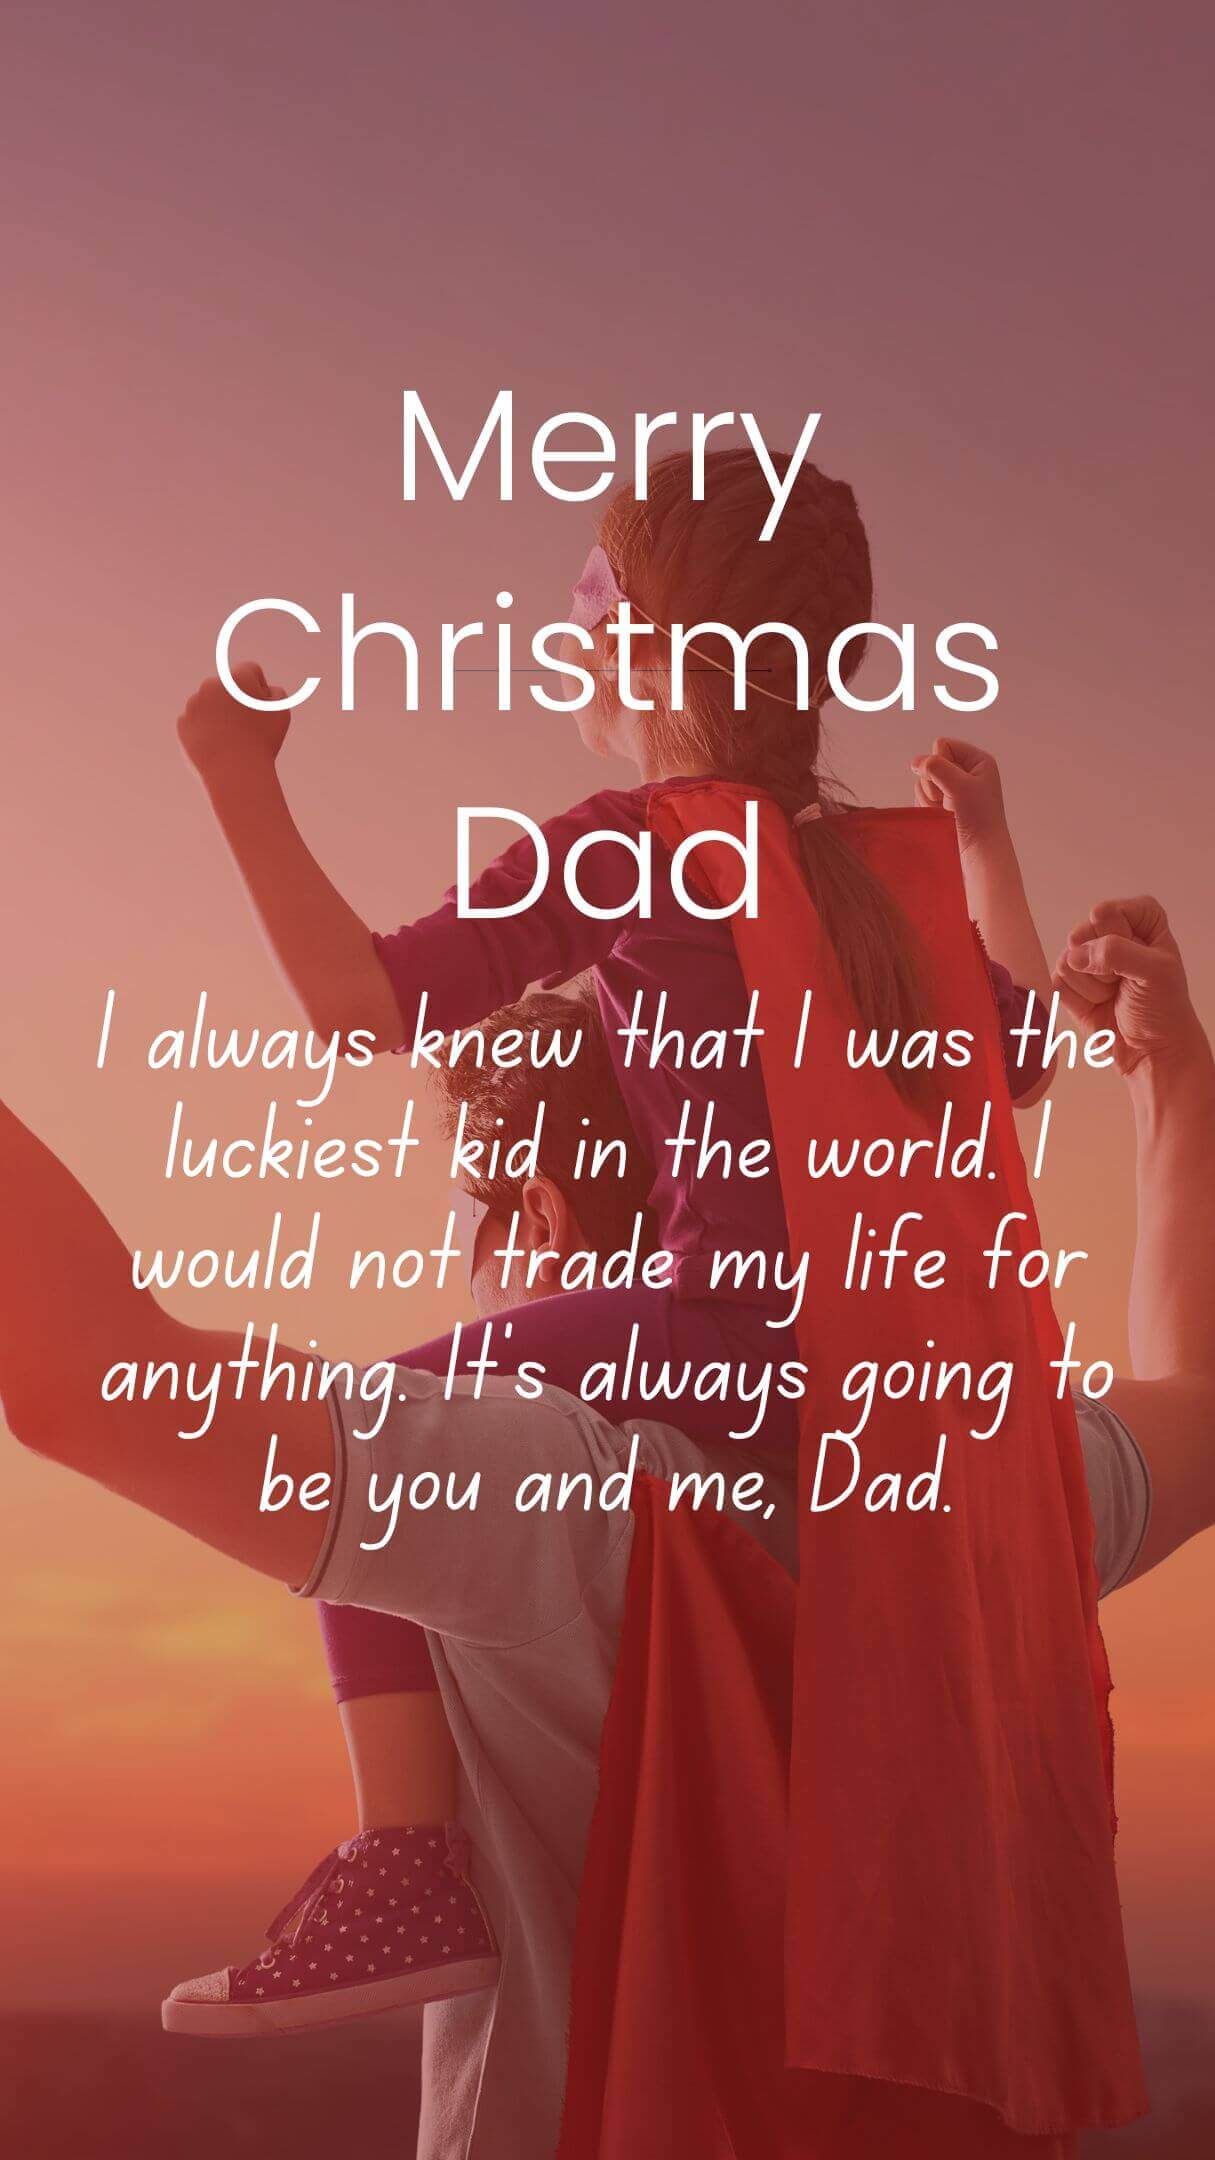 Merry Christmas Messages For My Father With Images